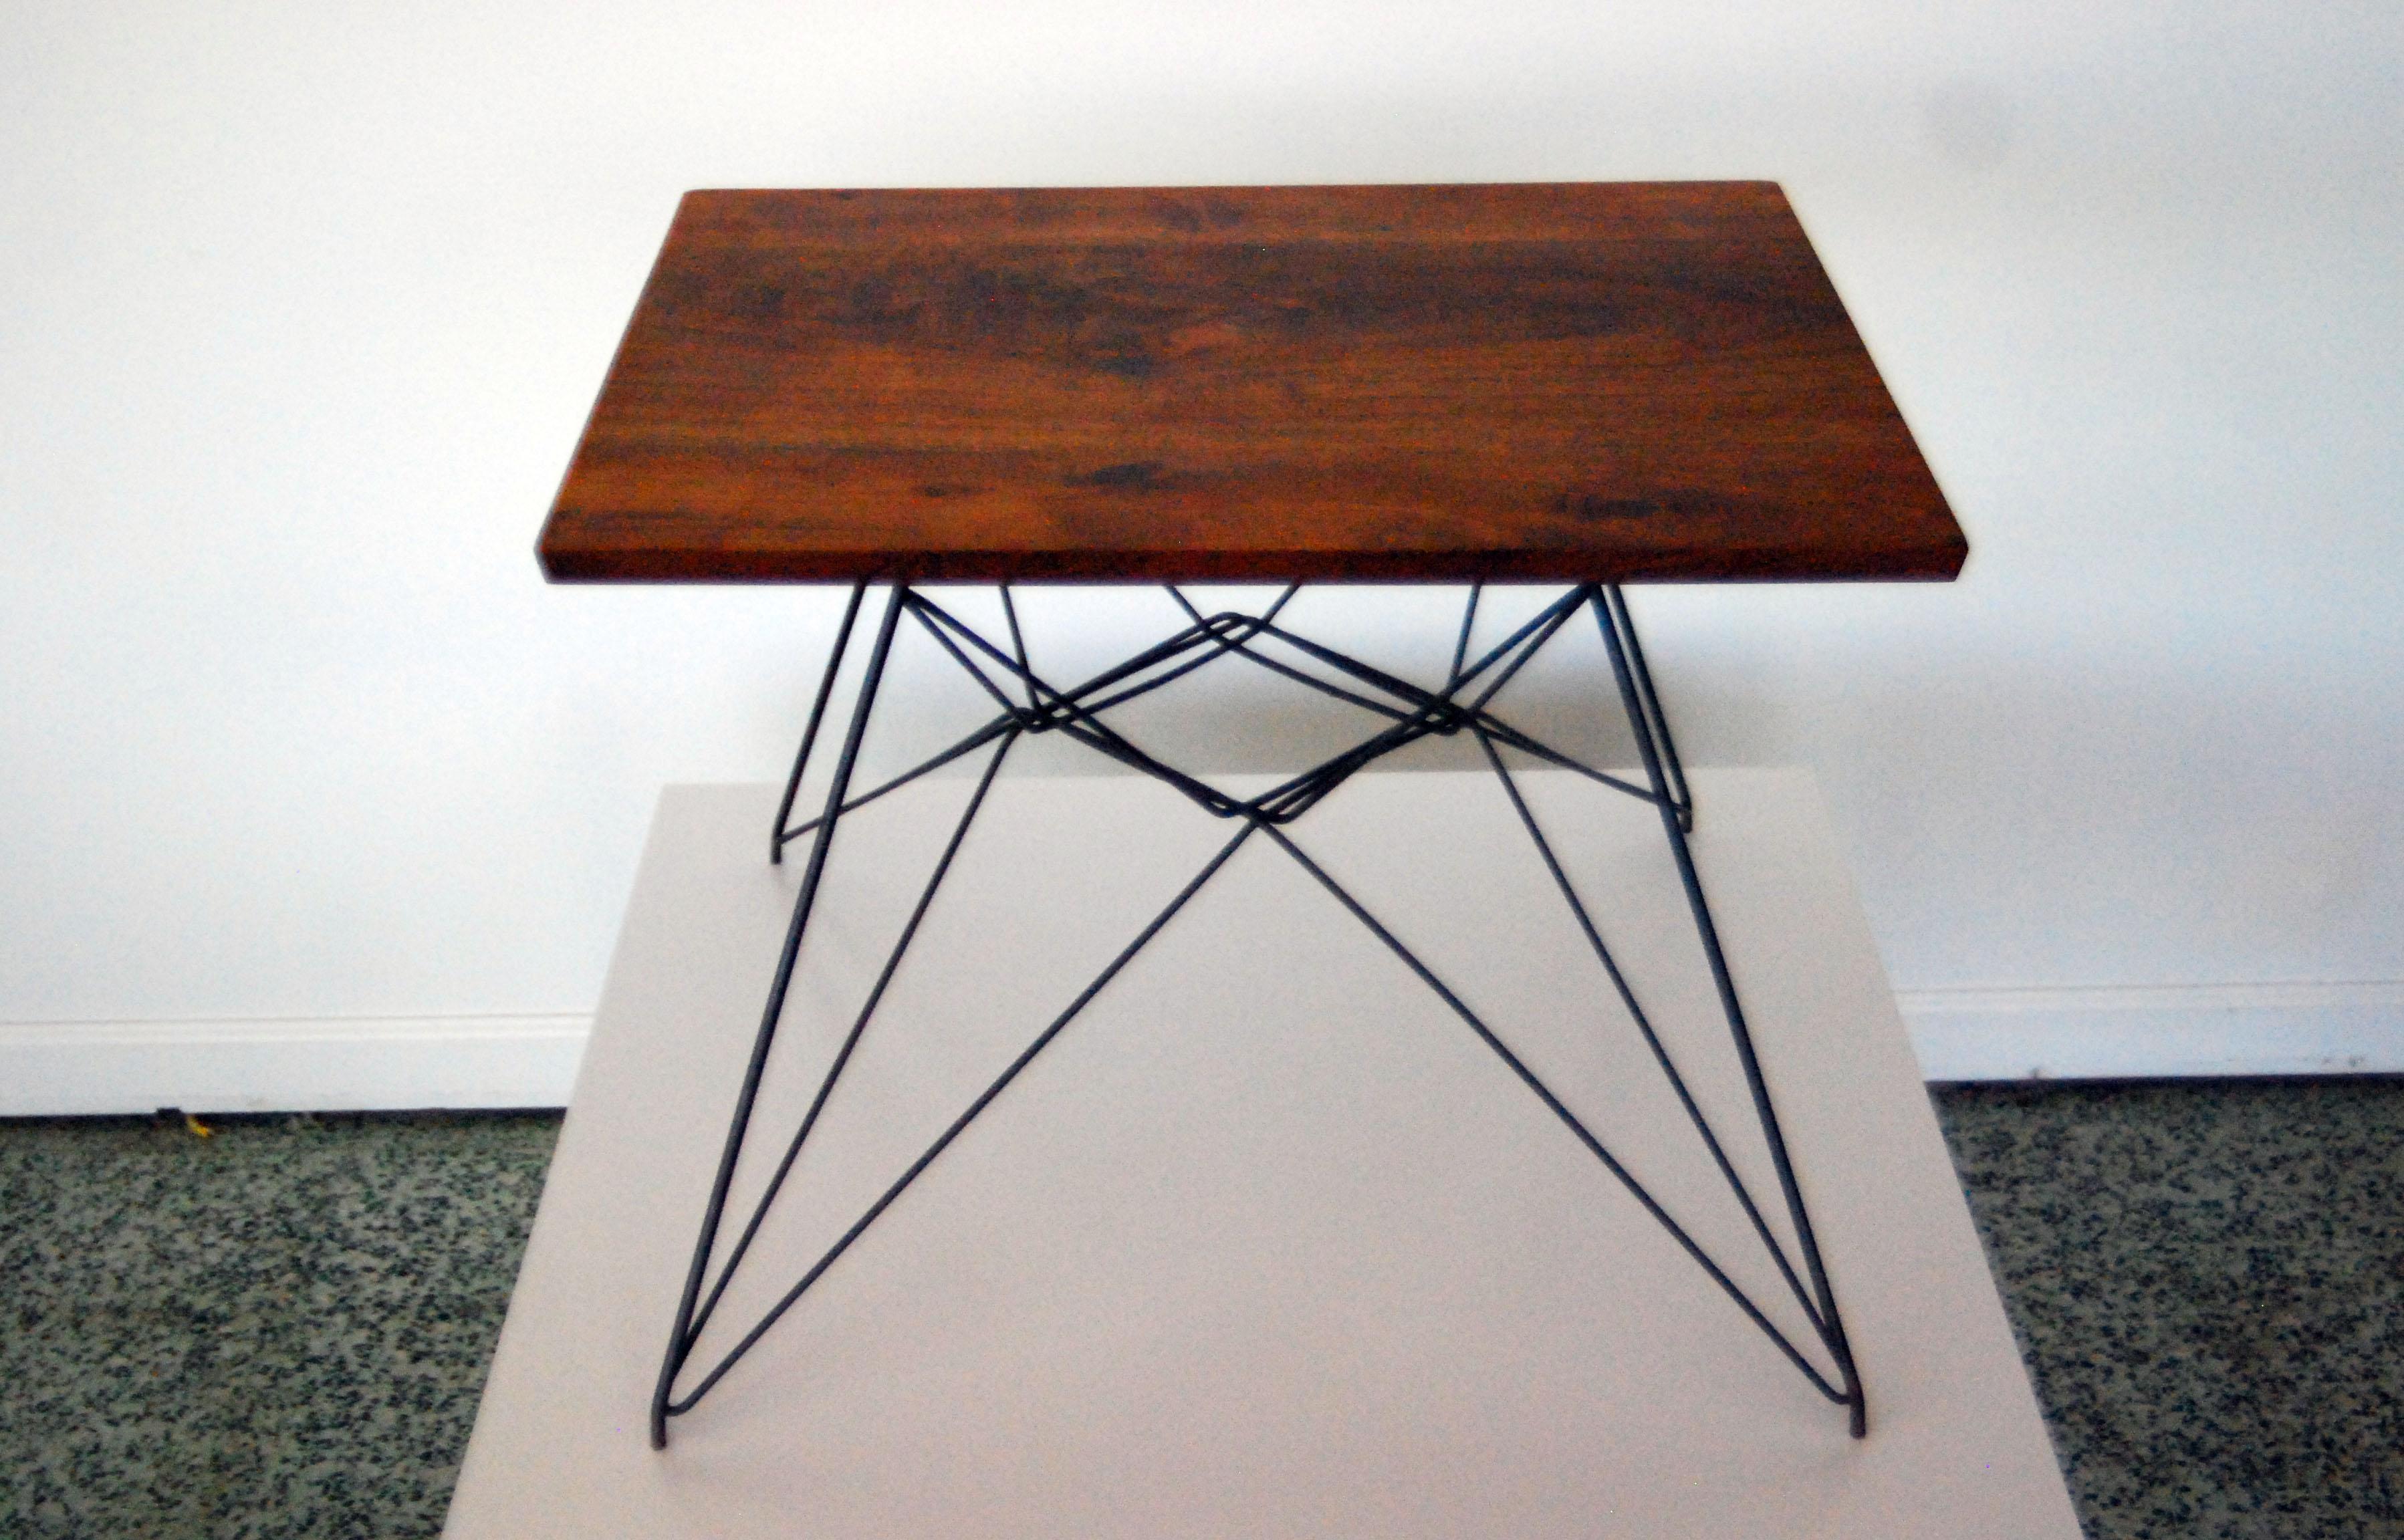 Early Eames Eiffel base table. The top has been recently redone, but the base is original. Scarce find.
 